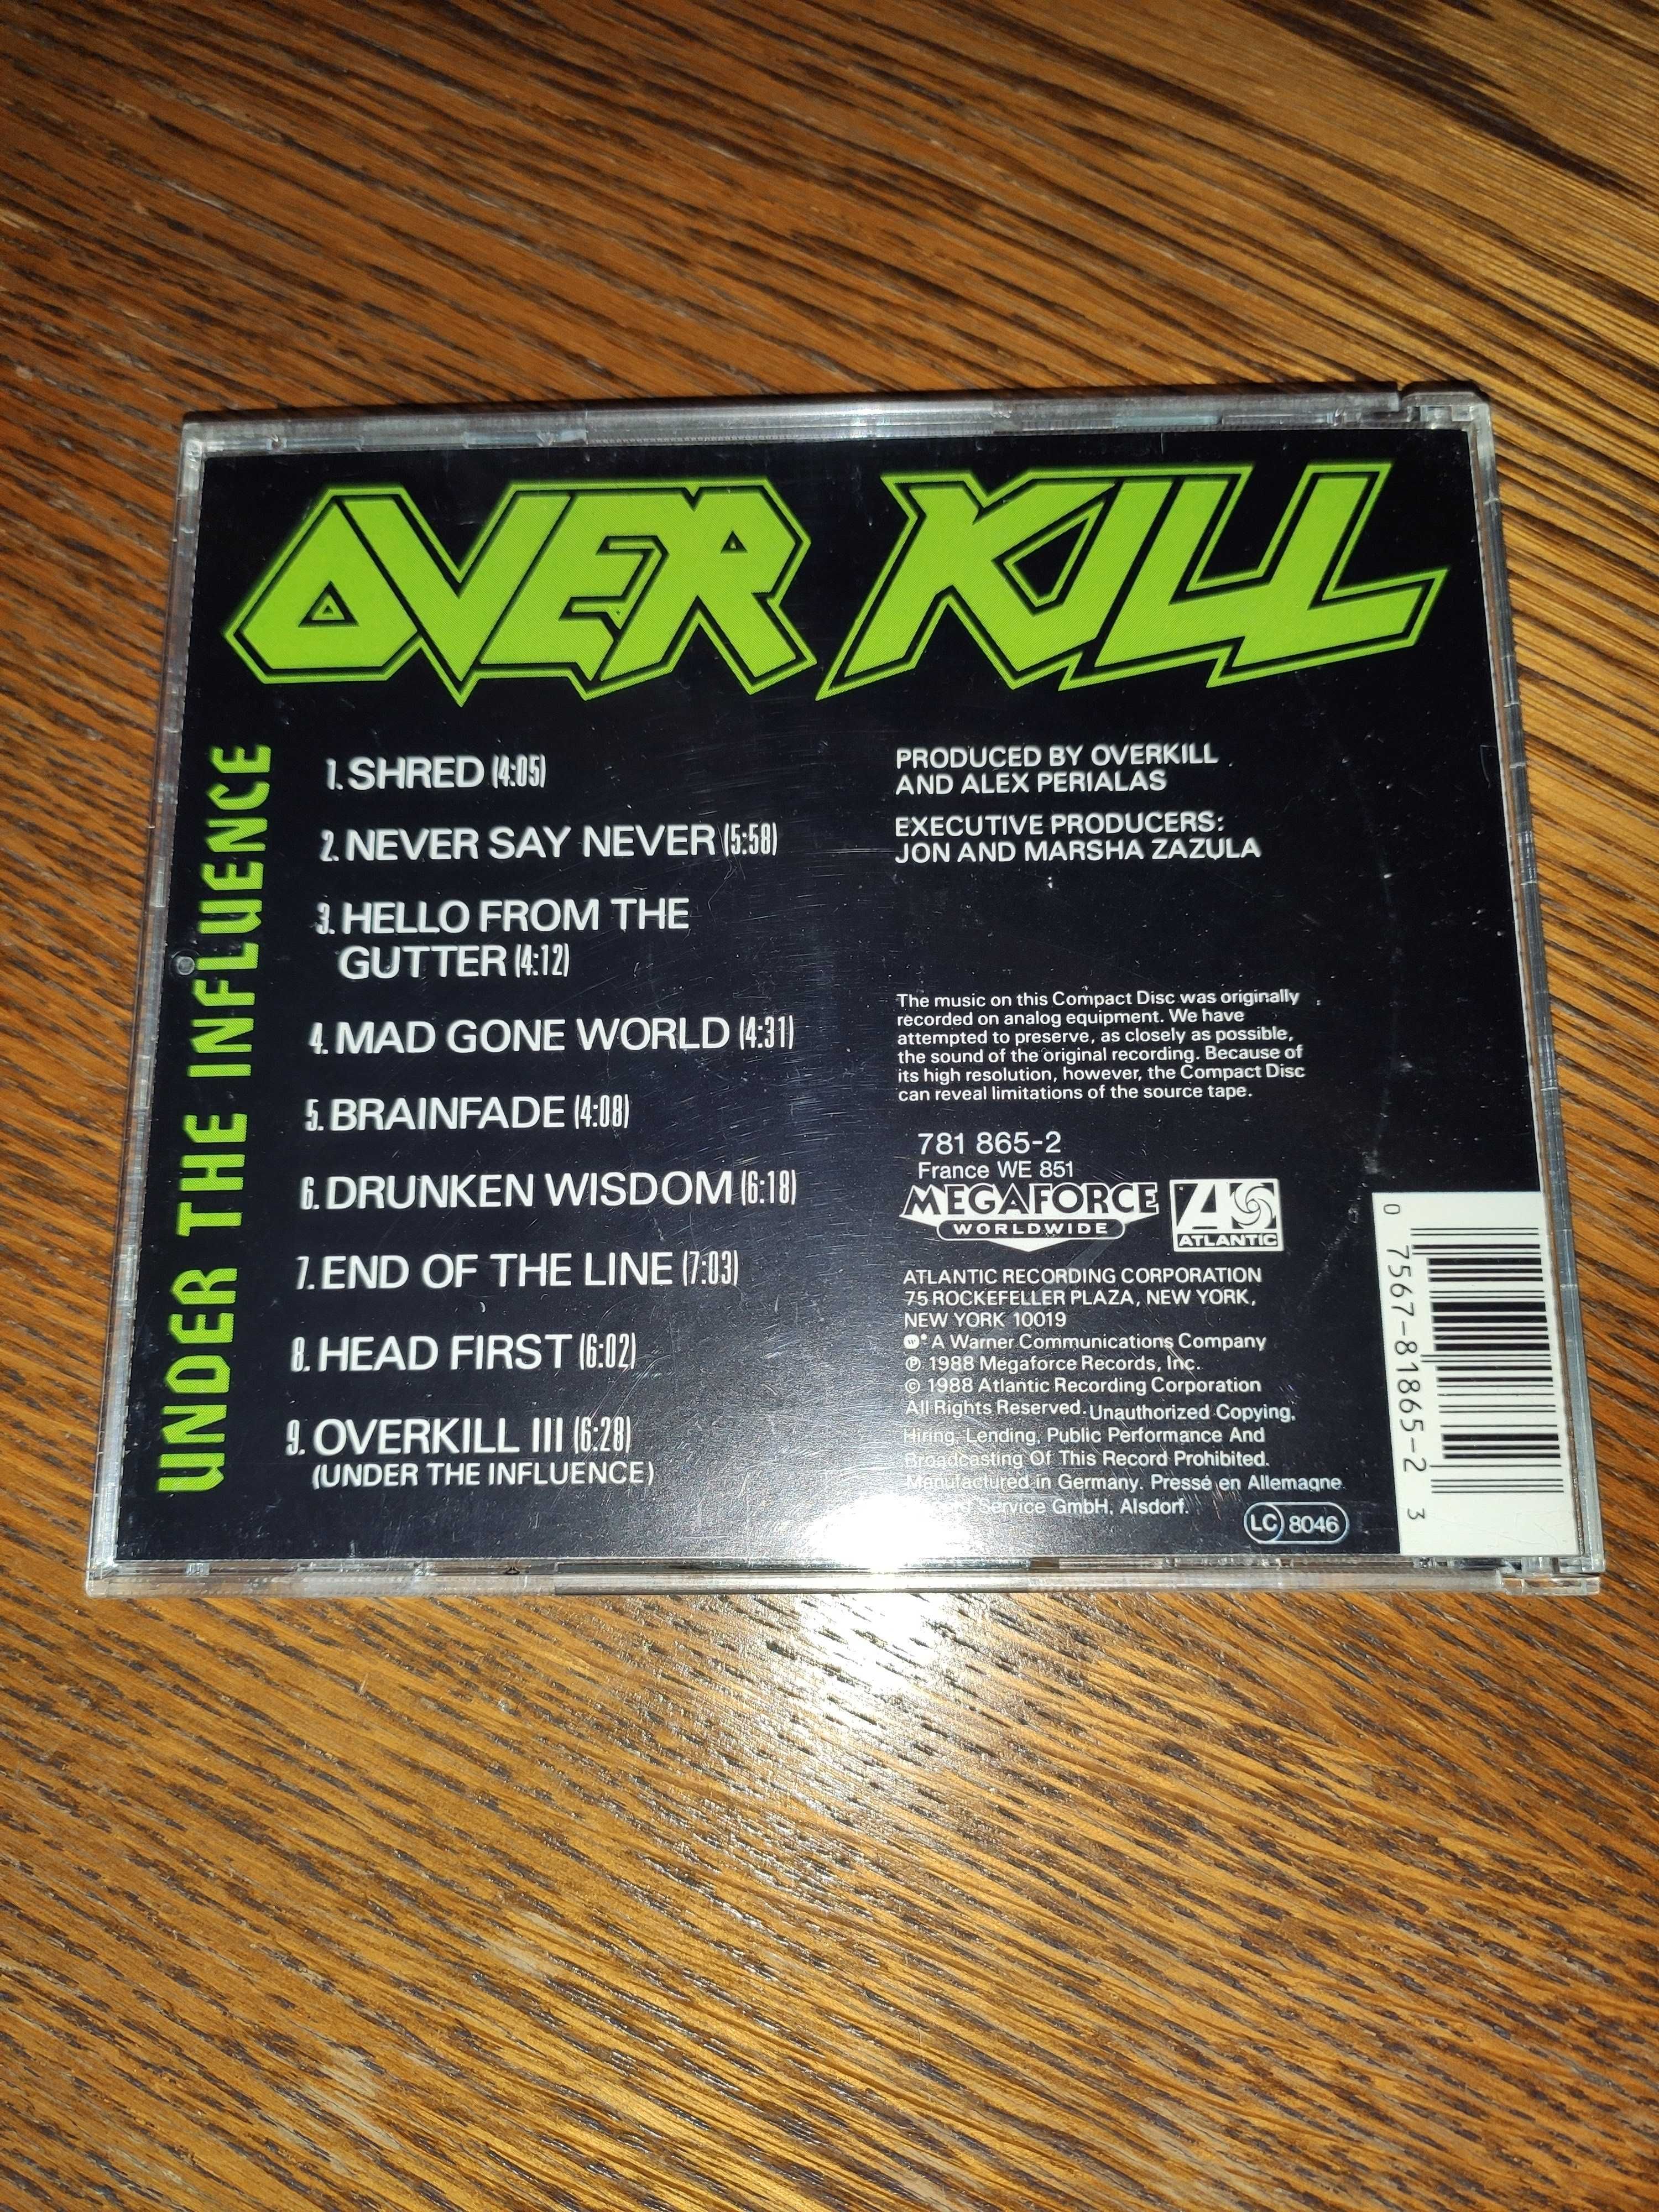 Overkill - Under the influence, CD 1988, France WE, over kill